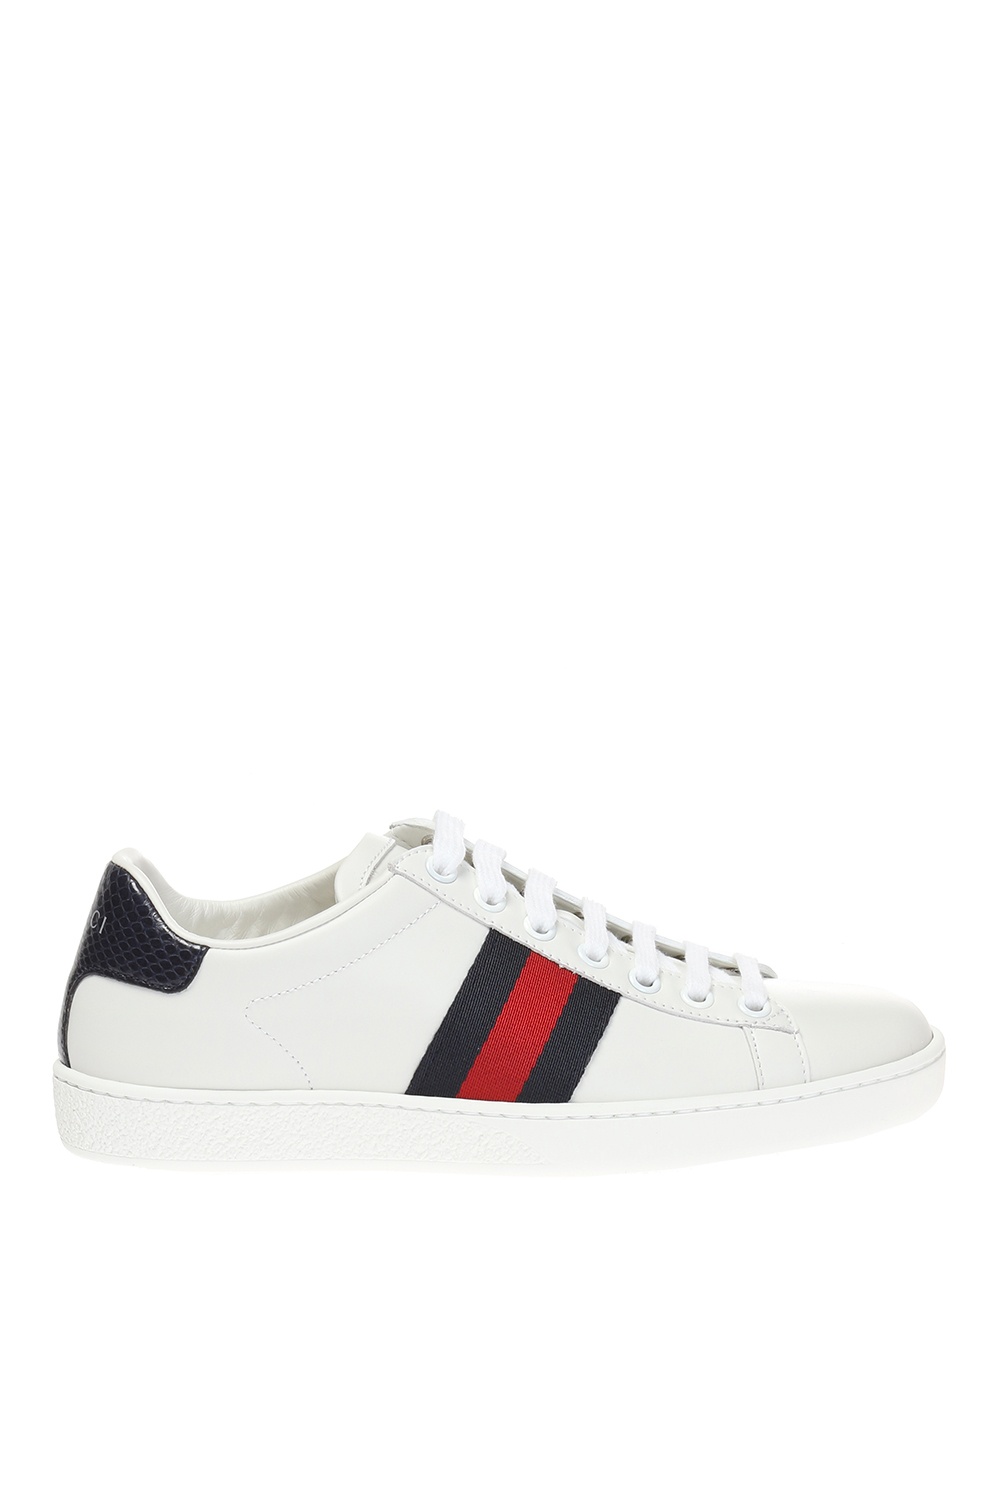 Web' striped 'ACE' sports shoes Gucci 